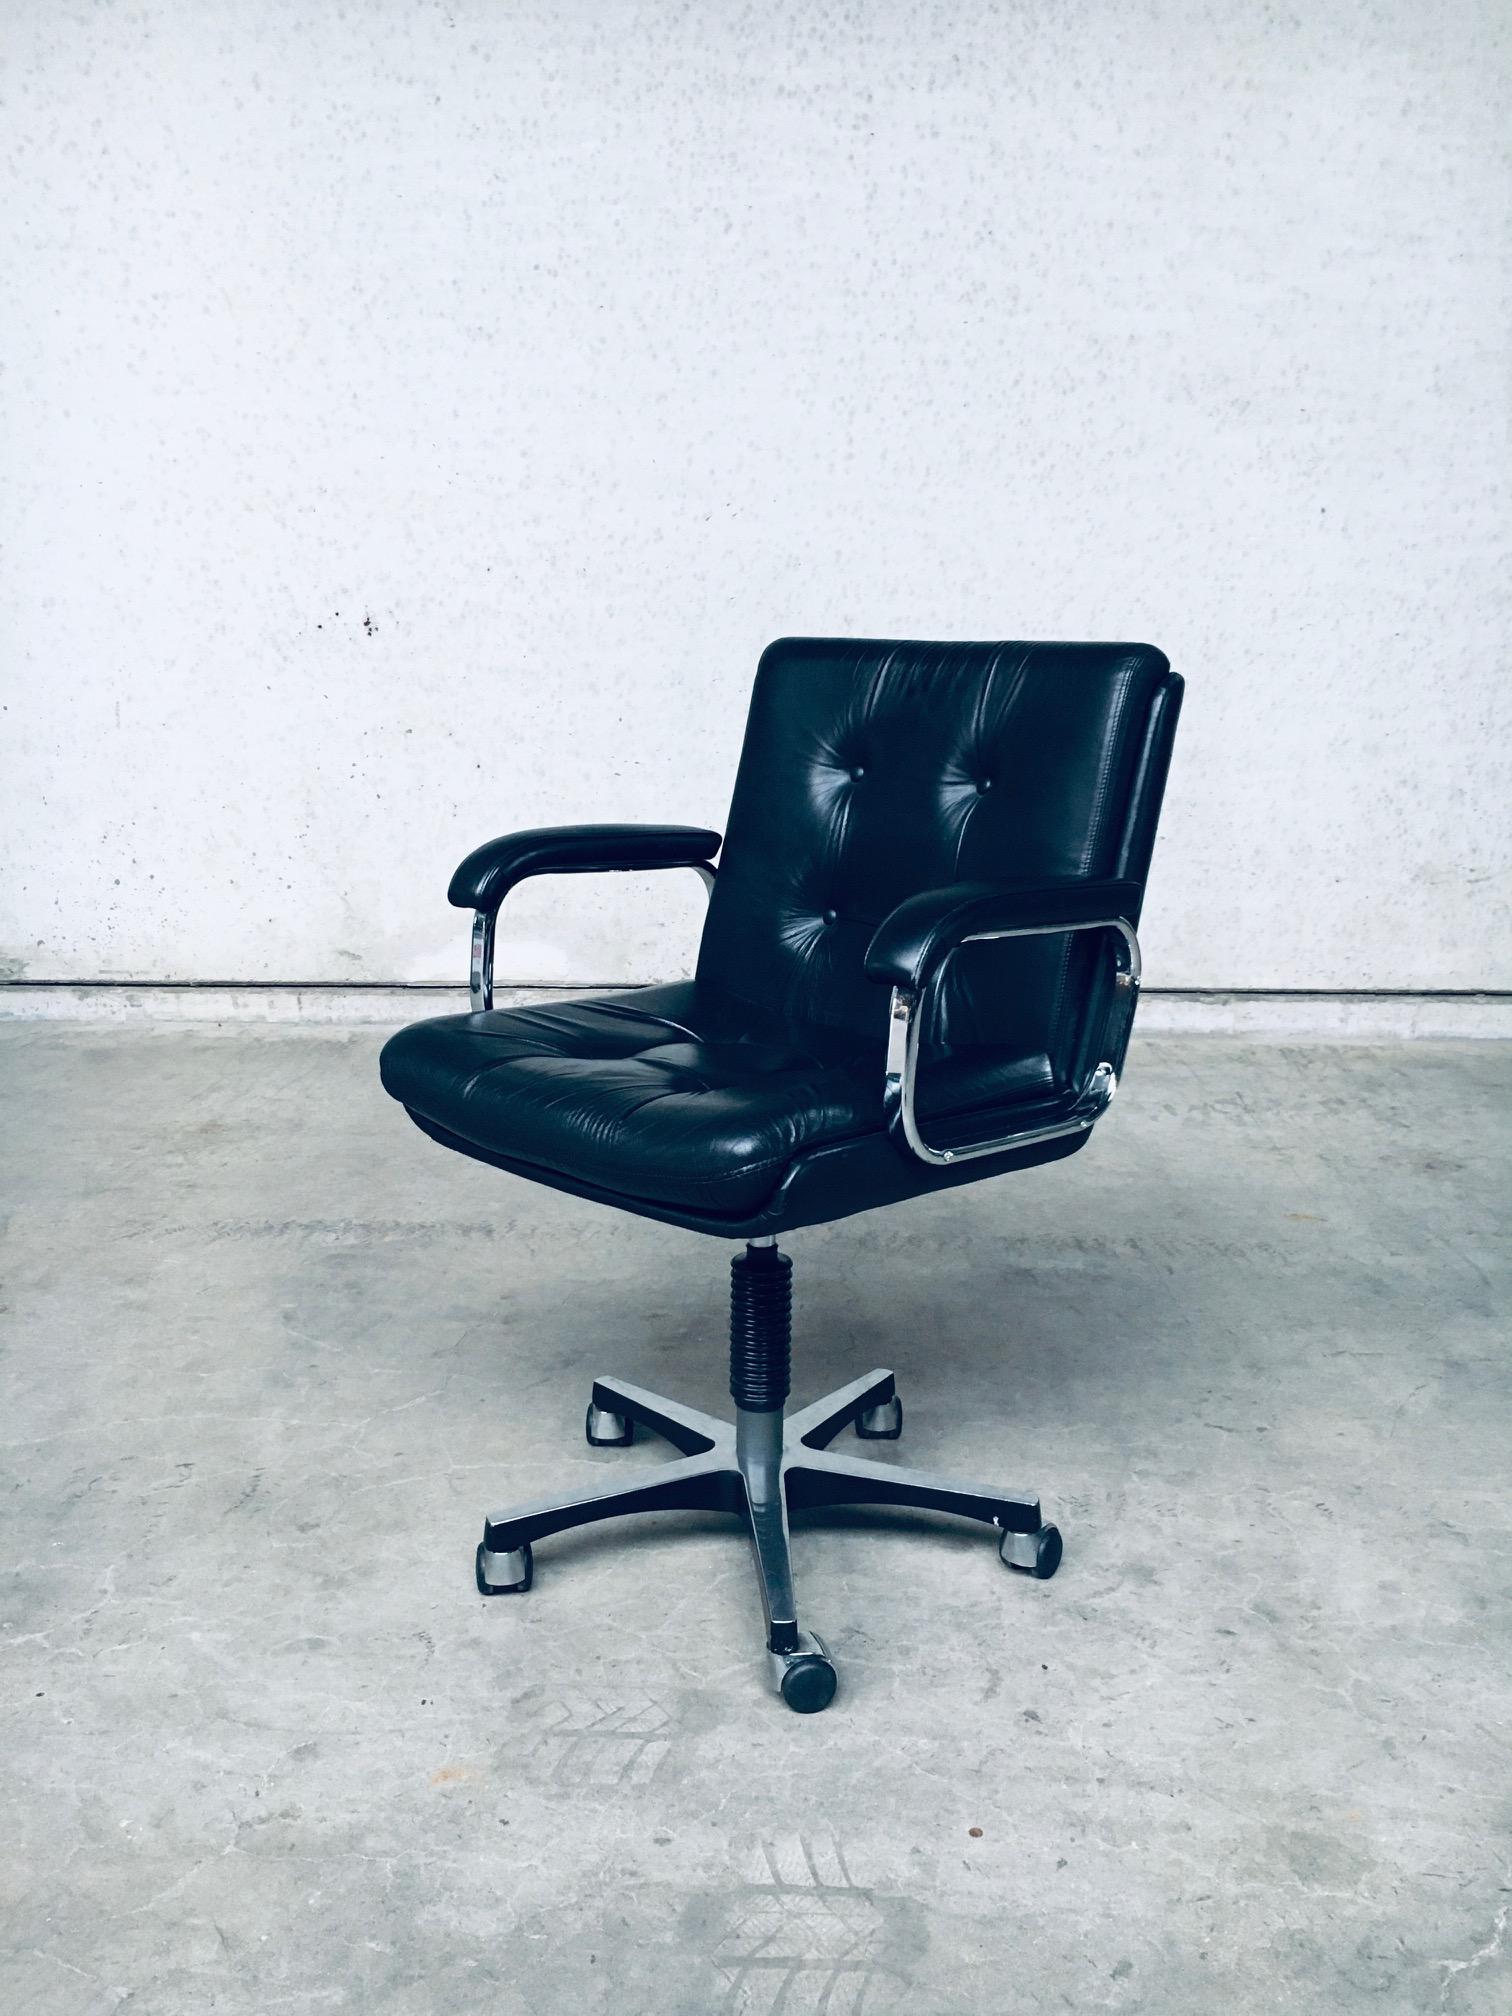 Late 20th Century Mid-Century Modern Design Leather Office Chair, Italy, 1988 For Sale